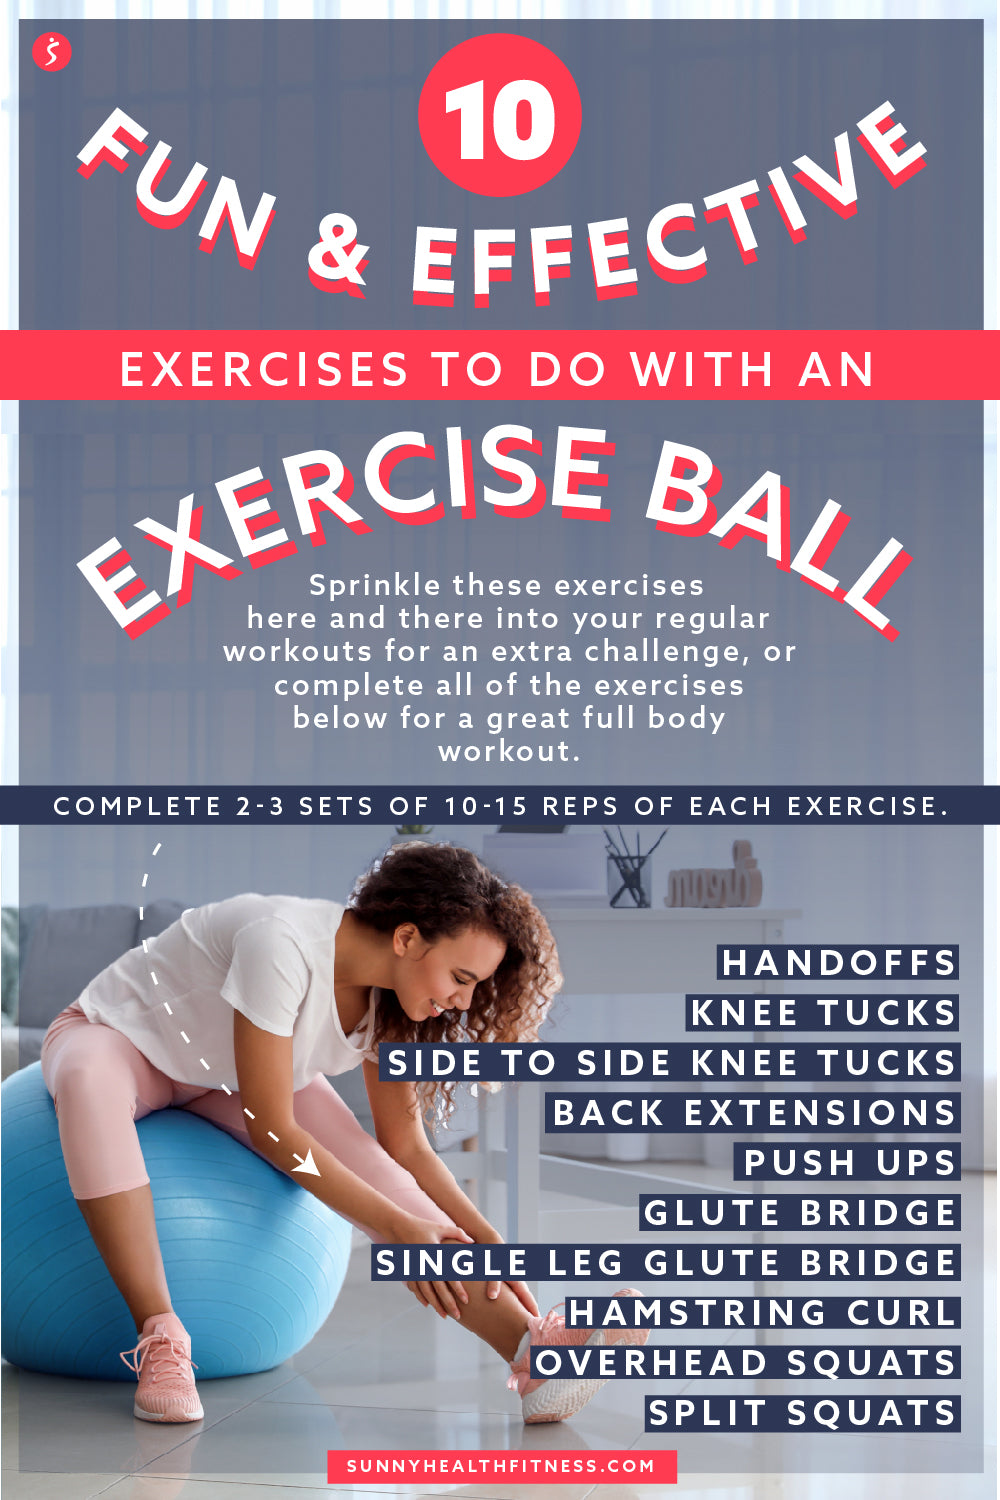 Yoga Ball Exercise Guide: Beginner Ball Workout for Balance, Stability, and  Core Strength. (Paperback)